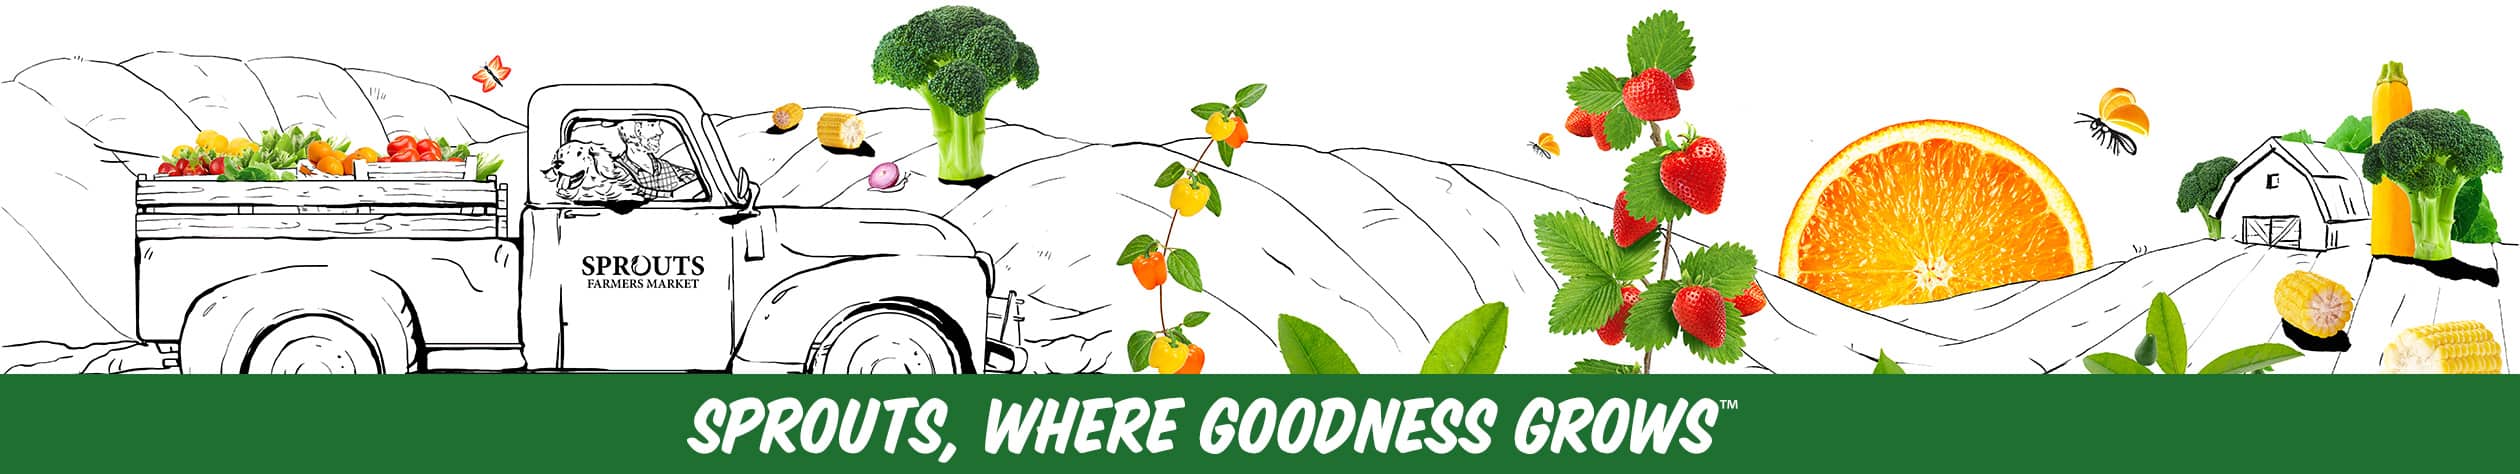 SPROUTS, WHERE GOODNESS GROWS